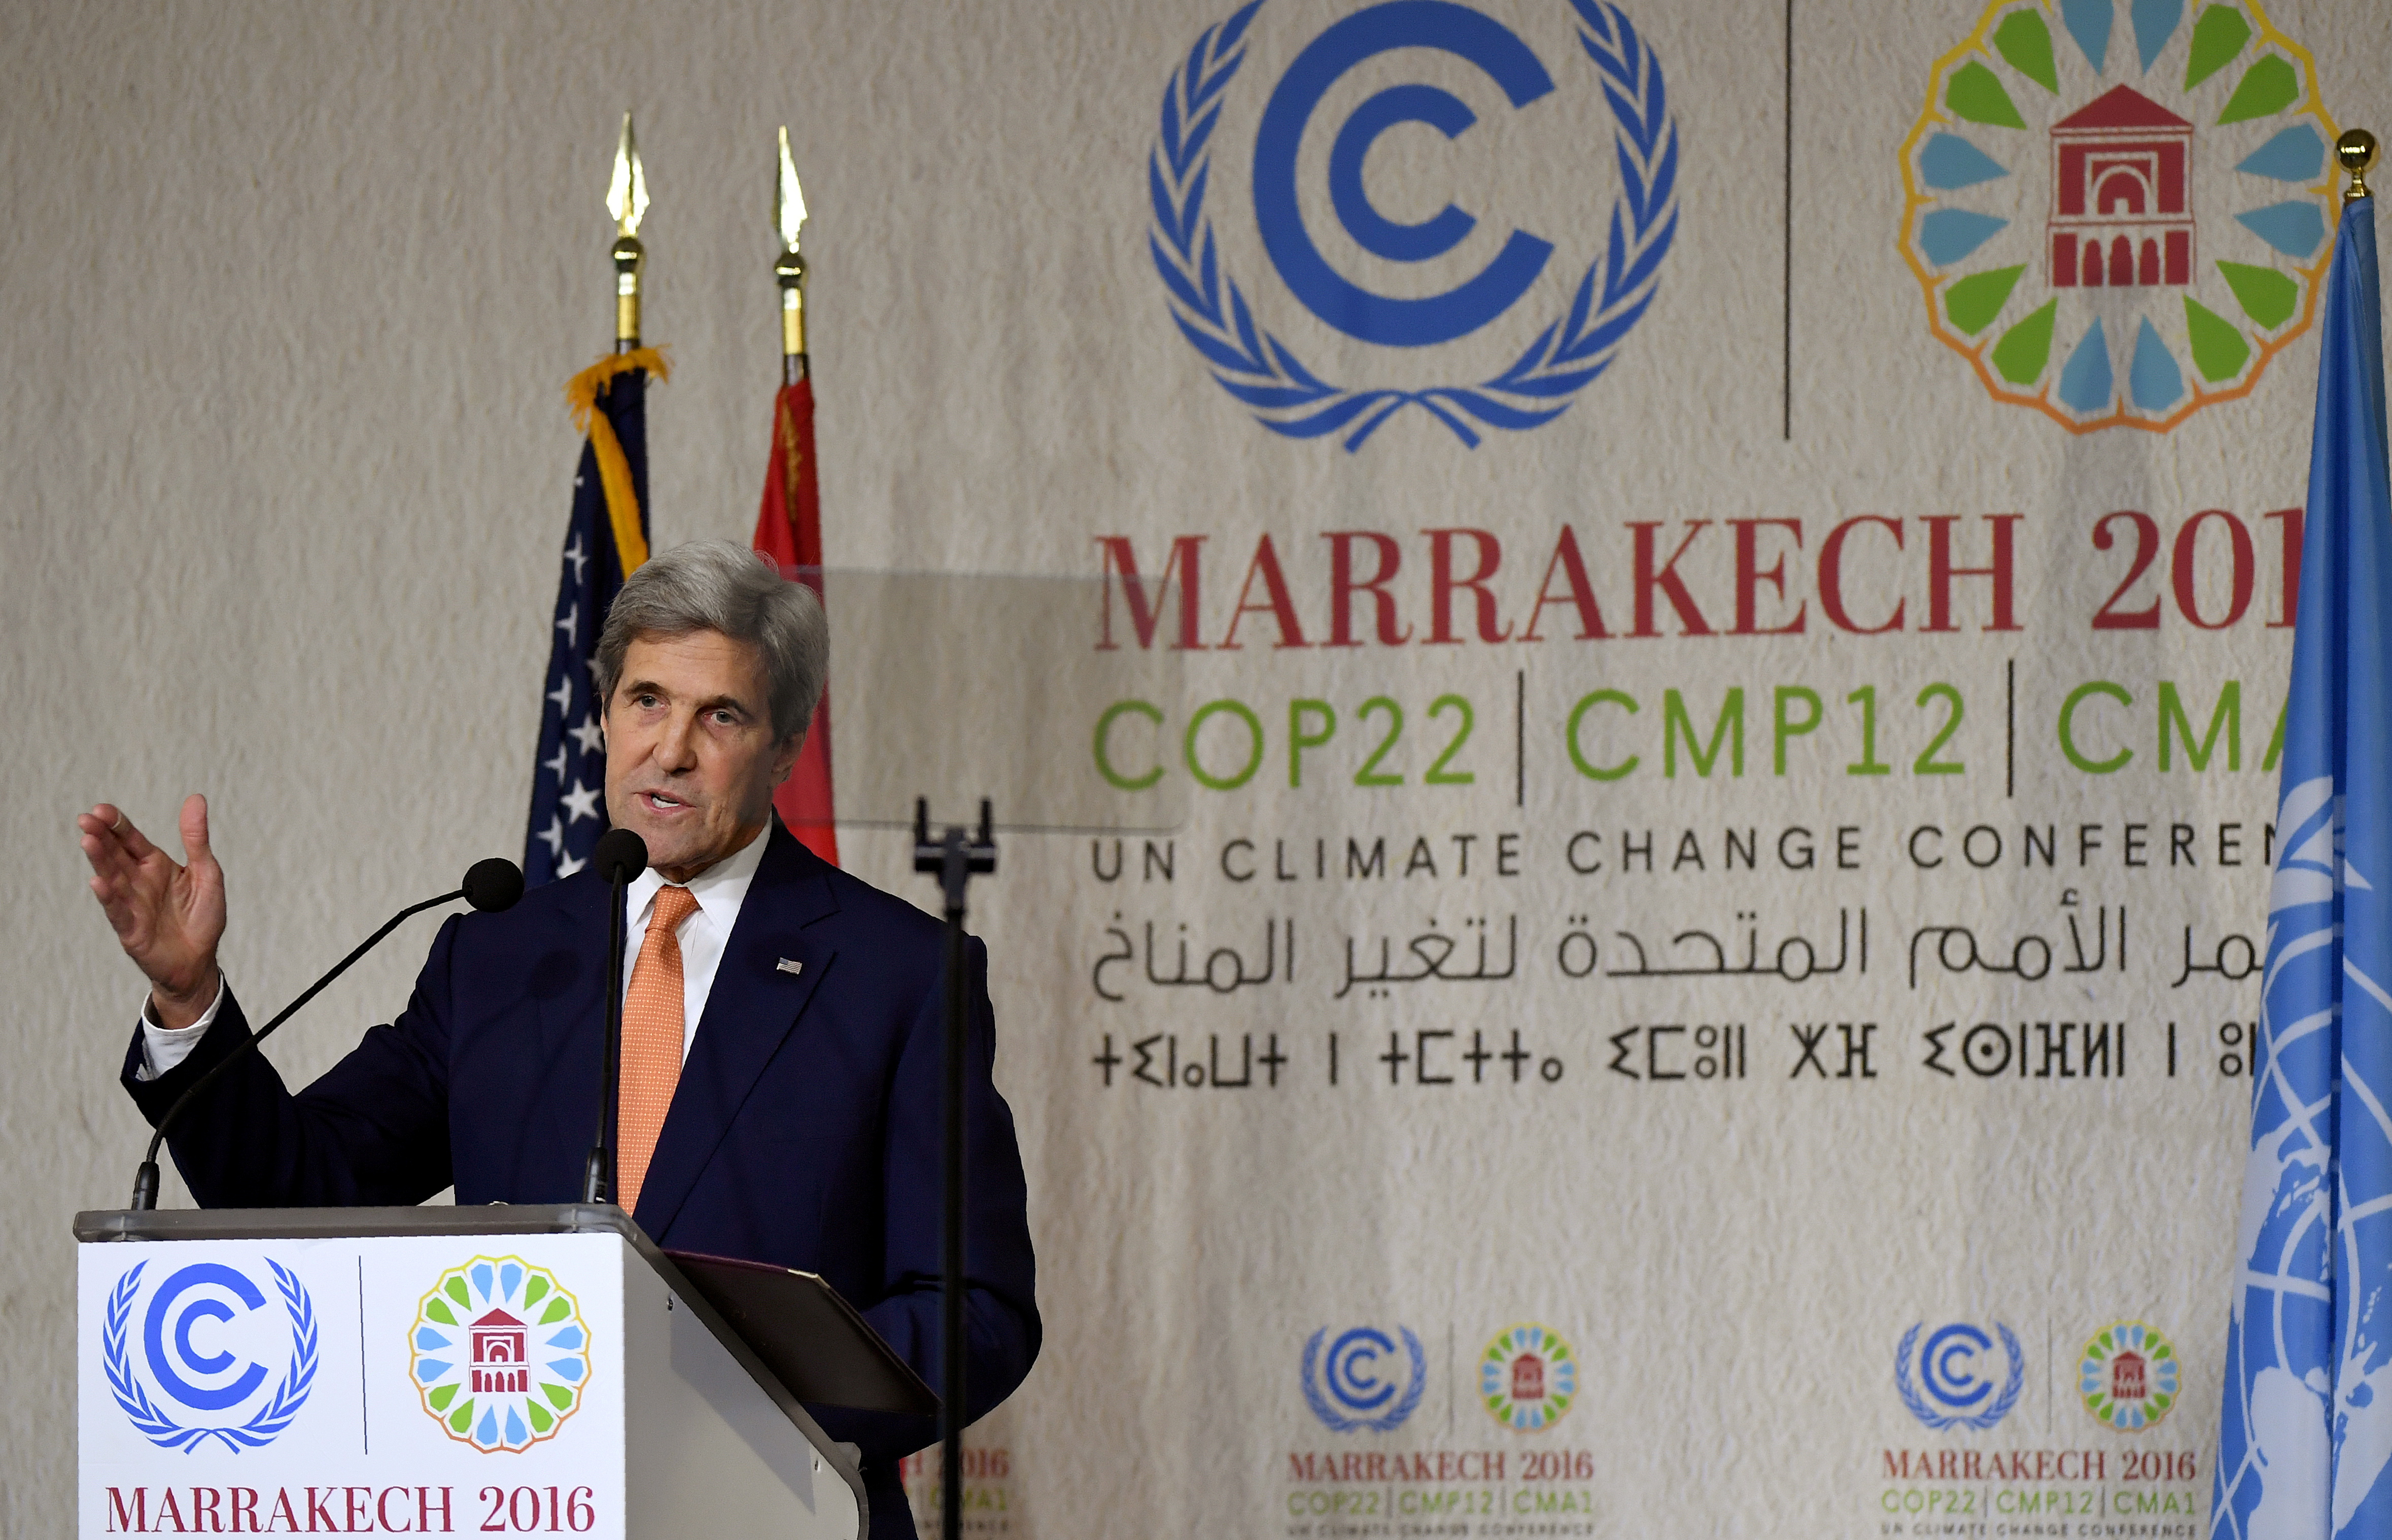 U.S. Secretary of State John Kerry gives a speech at the COP22 Climate Change Conference in Marrakech, Morocco November 16, 2016. REUTERS/Mark Ralston/Pool/File Photo